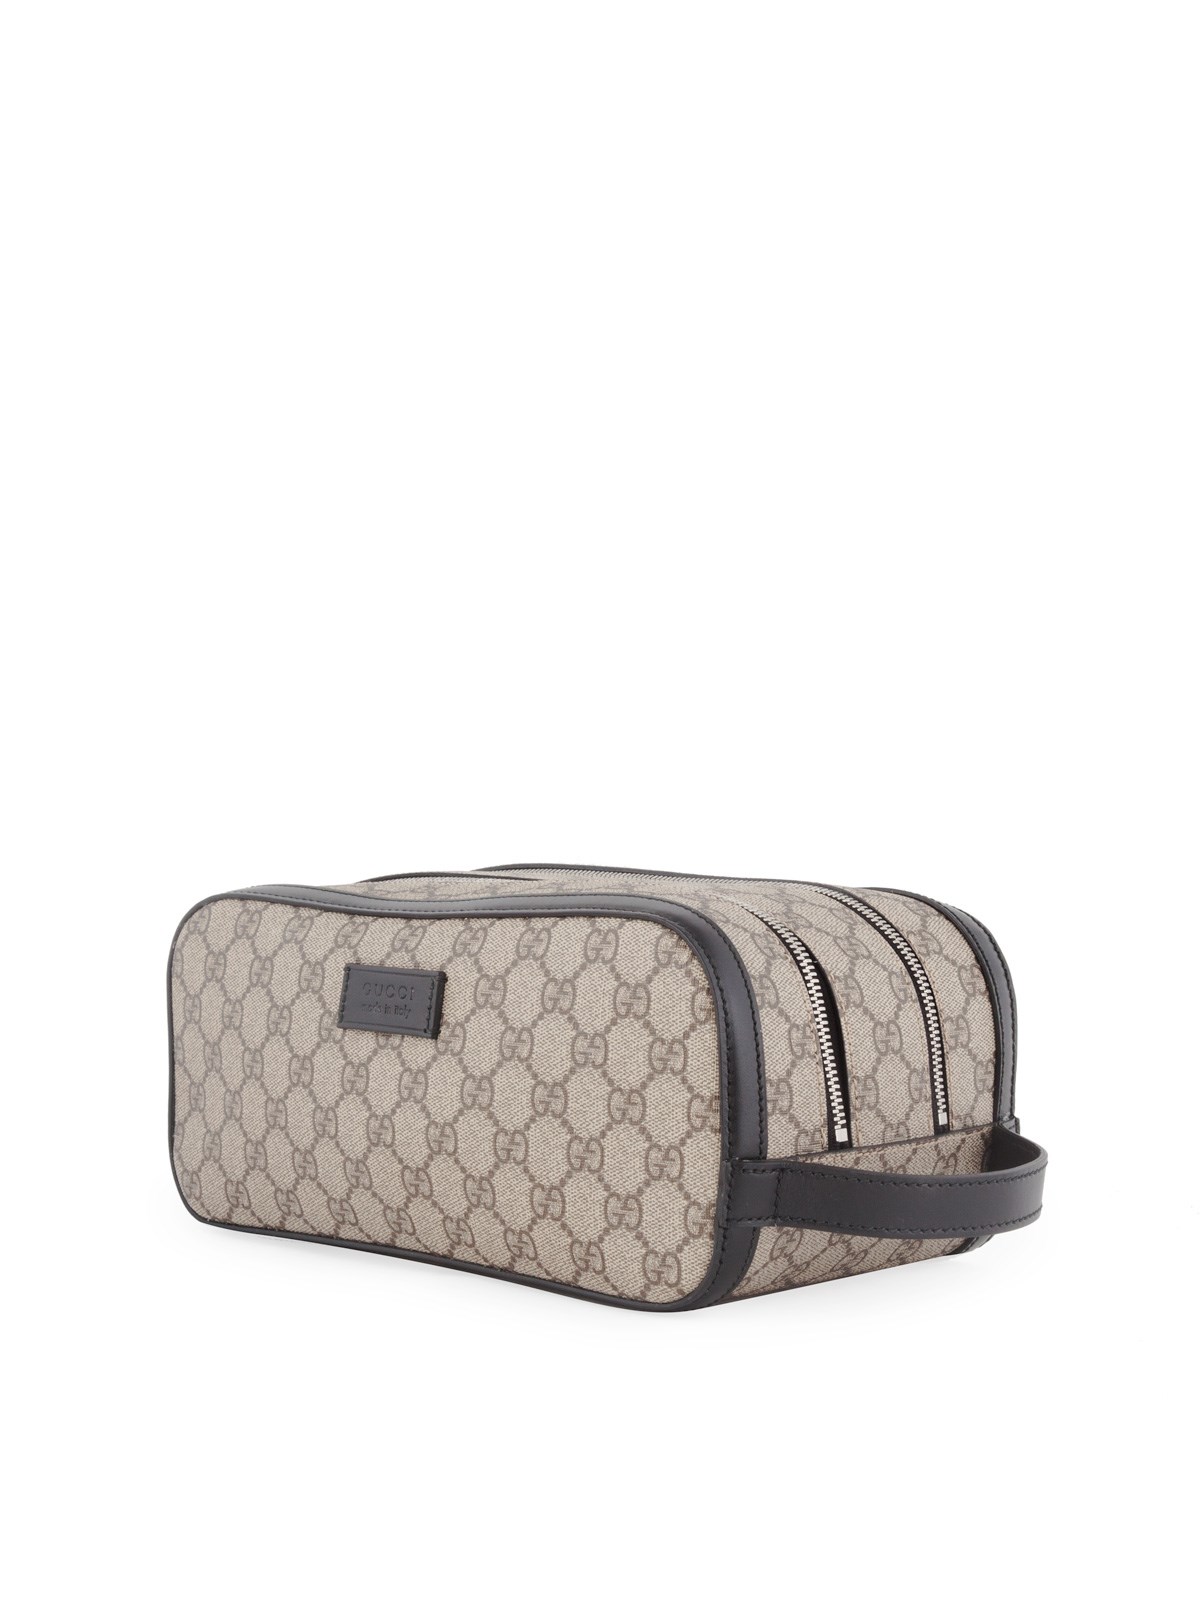 gucci GG SUPREME TOILETRY CASE available on 0 - 20883